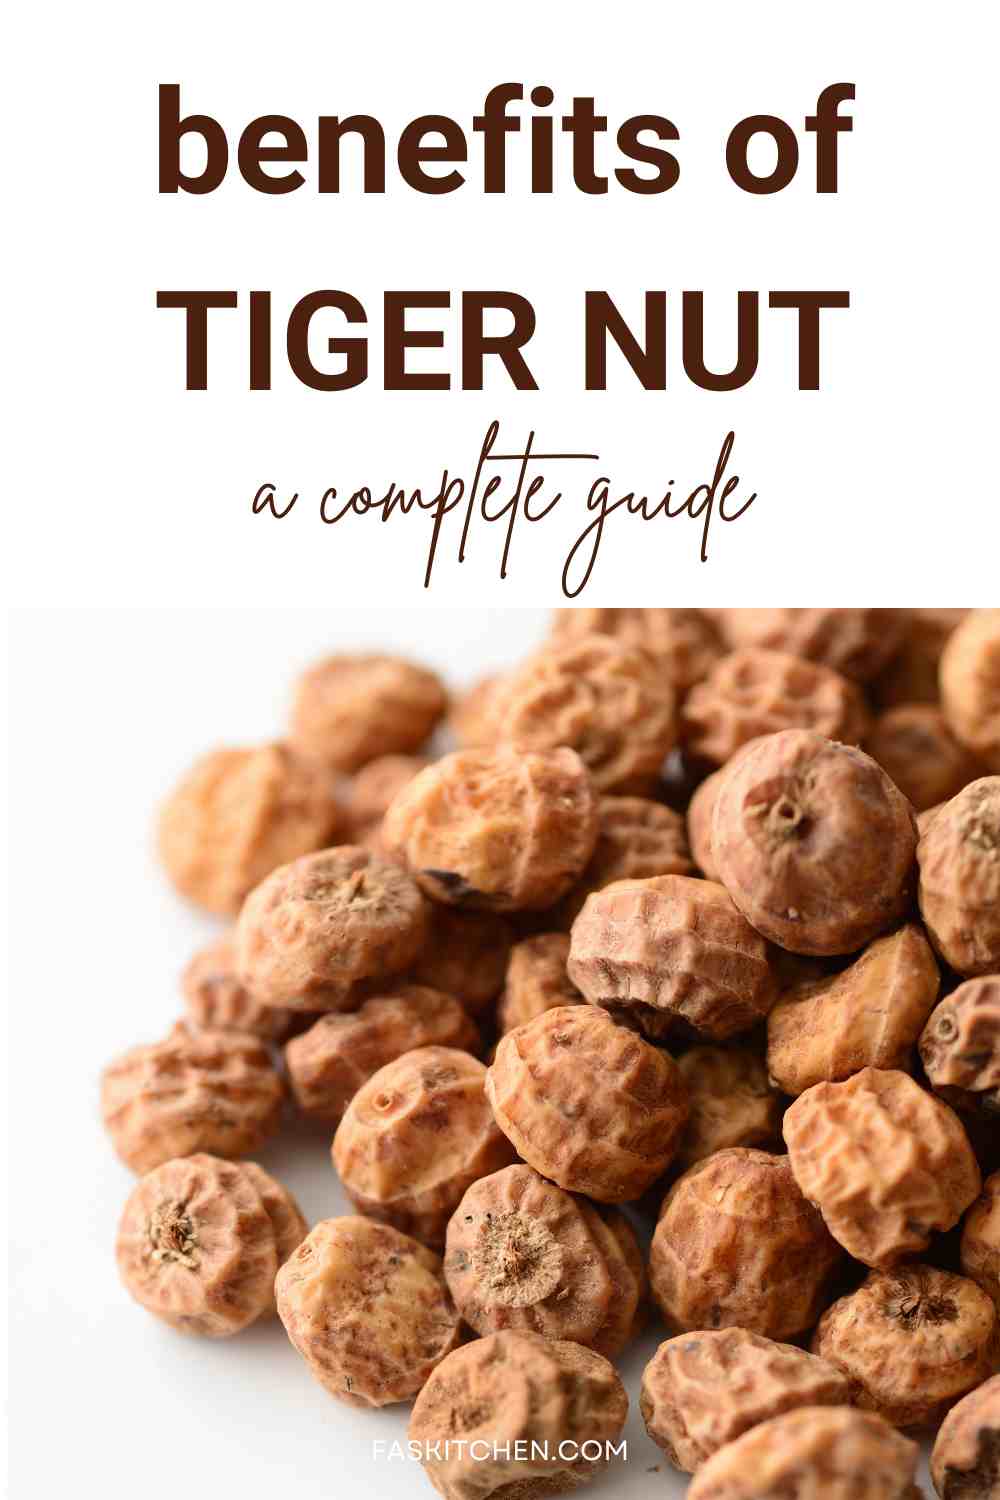 Tiger Nut 101: Nutrition, Benefits, How To Cook, Buy, Store A